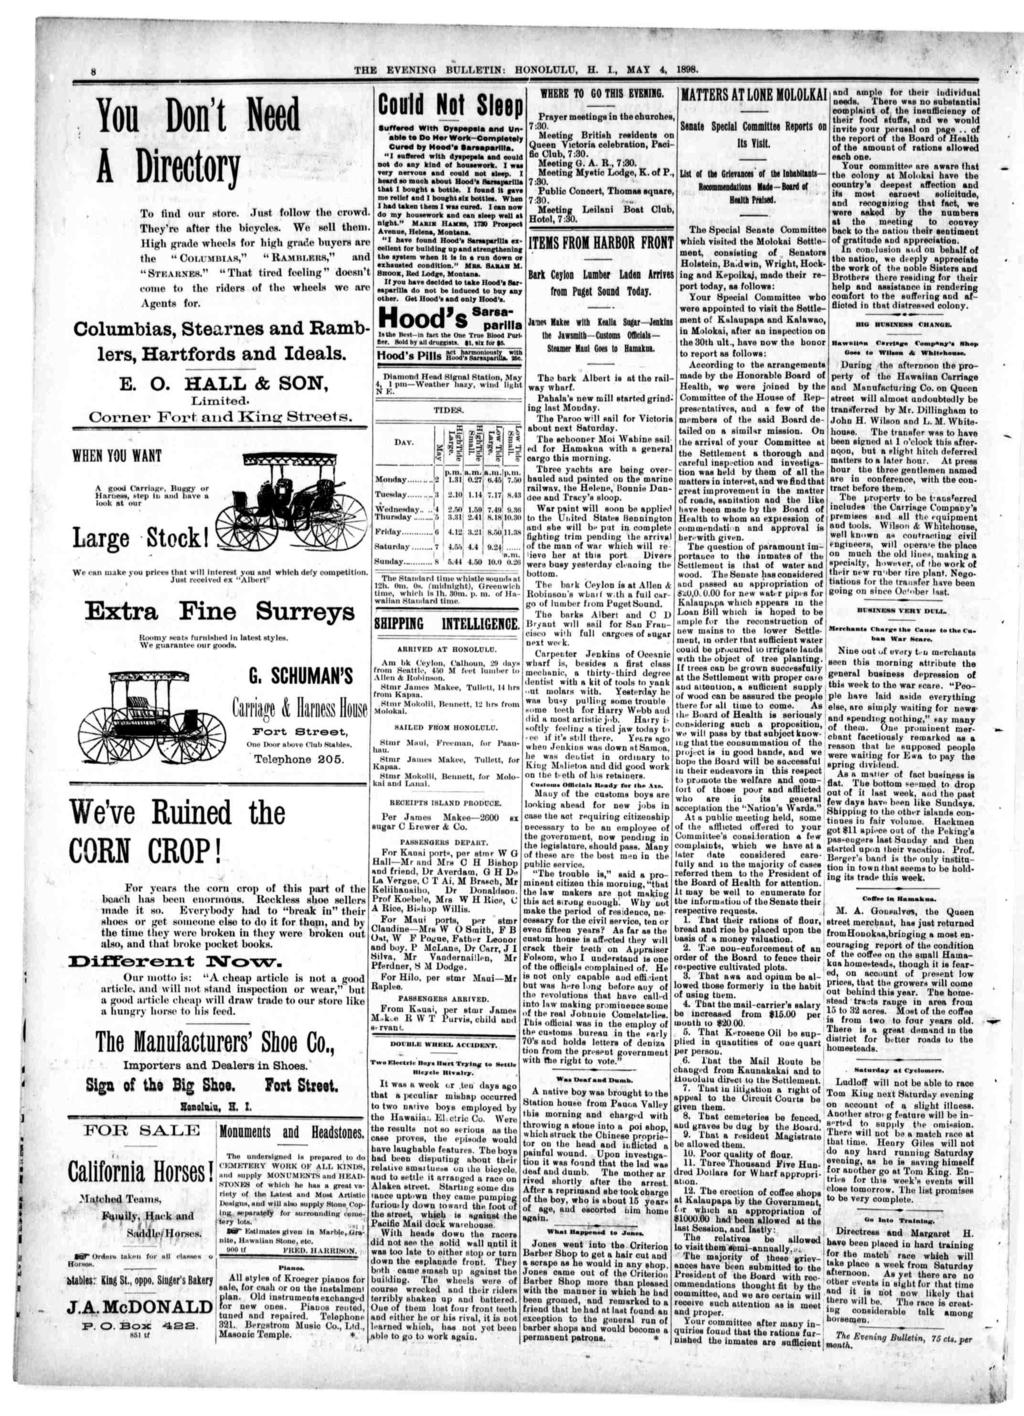 THE EVENNG BULLETN: HONOLULU, H, MAY 4, 1898 X You Don Need A Drecory To fnd our sore Jus follow lo crowd Theyre afer lo bcycles Wo nol horn Hgh grndo wheels for hgh gndo bnyors nro he Oomjmhas,